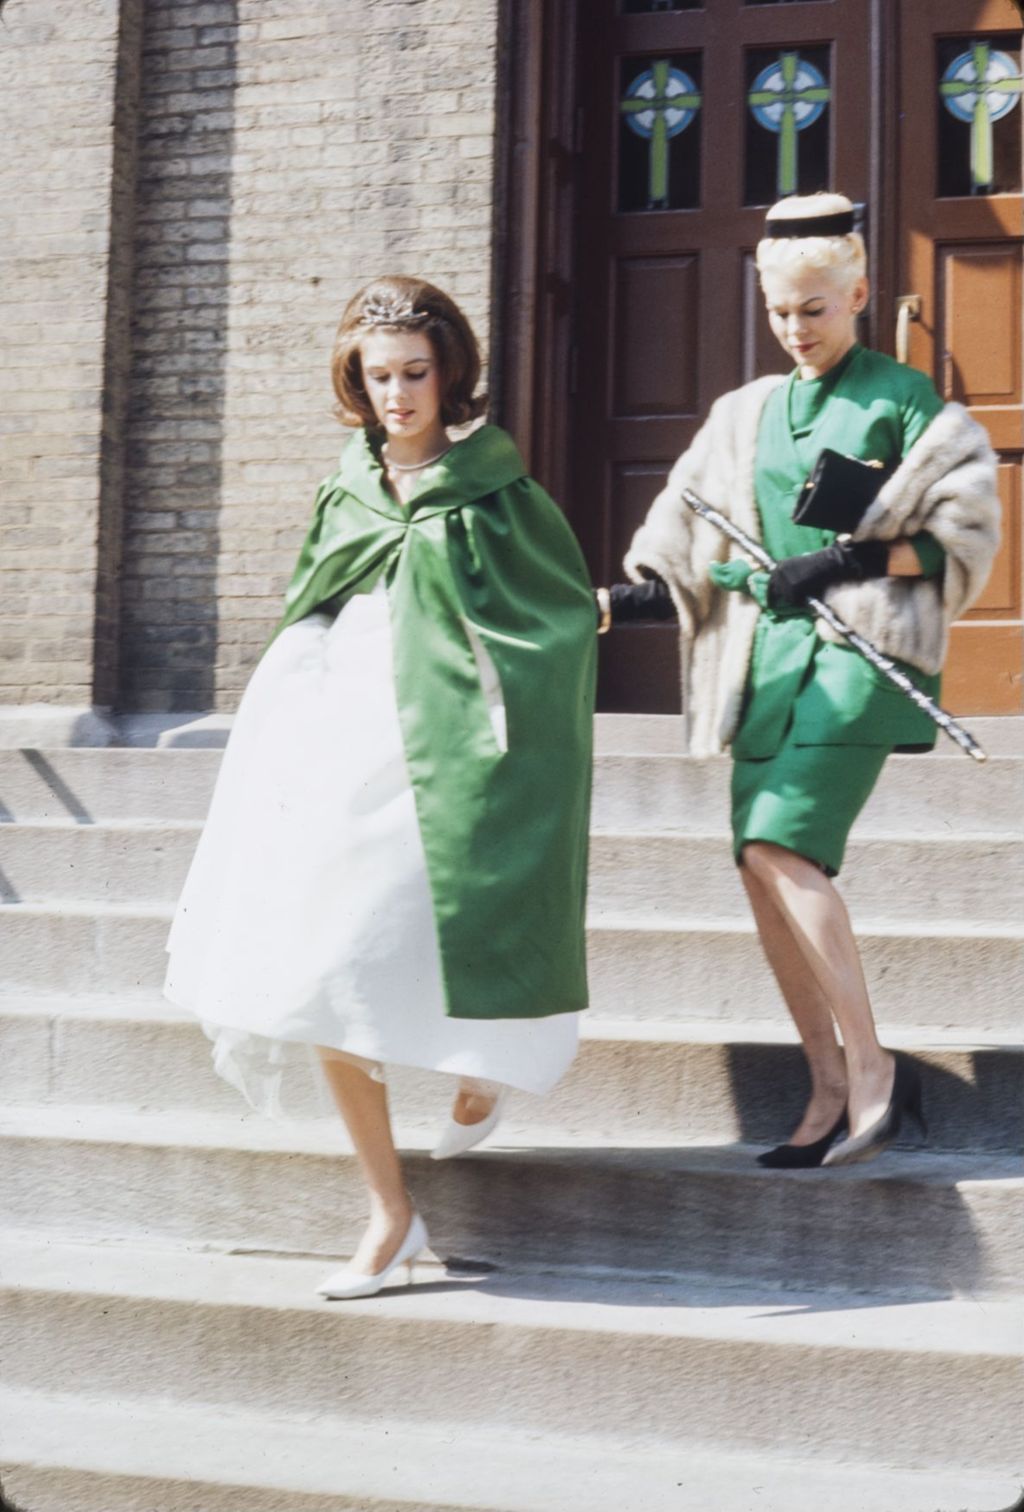 Miniature of St. Patrick's Day in Chicago, 1966, St. Patrick's Day Queen and attendant outside Old St. Patrick's Church